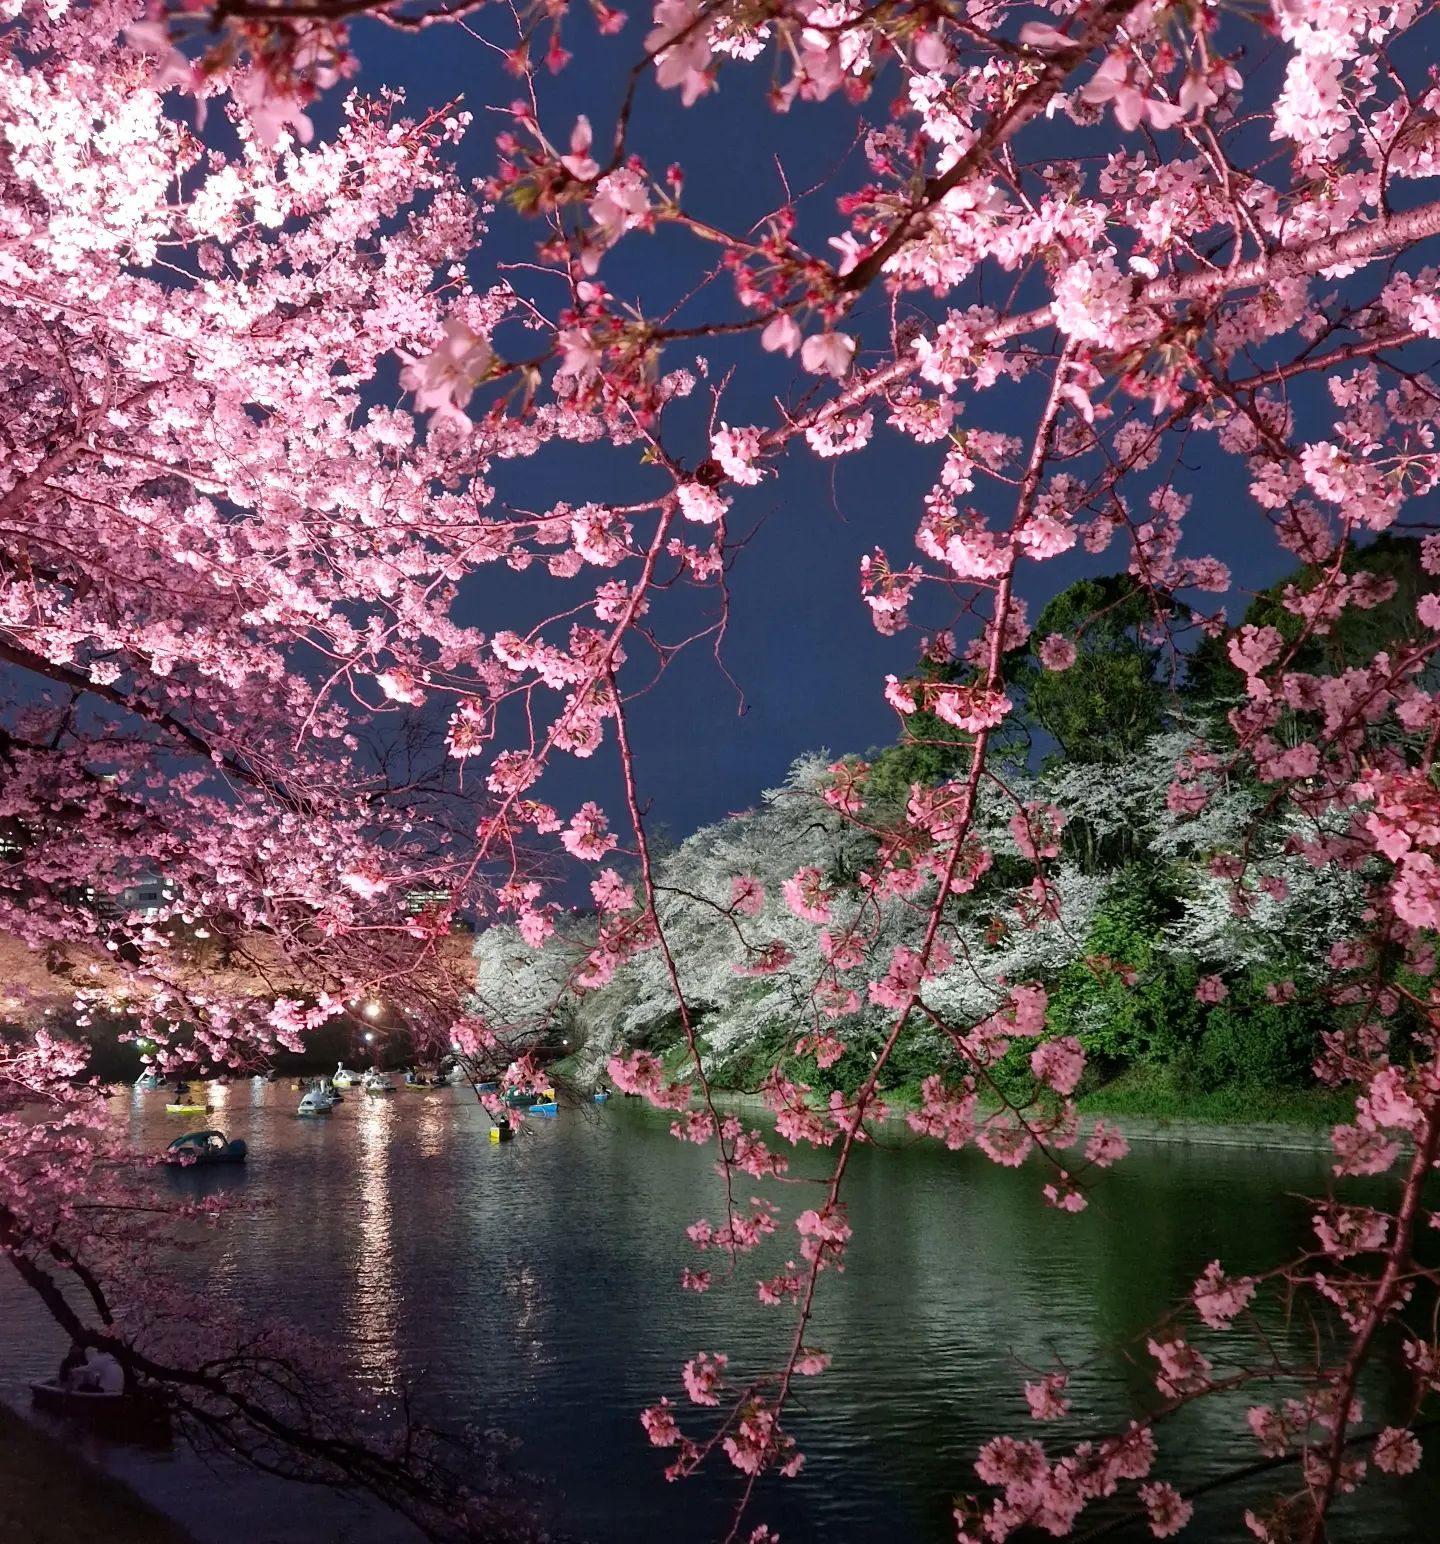 Cherry Blossoms in Japan - illuminated trees